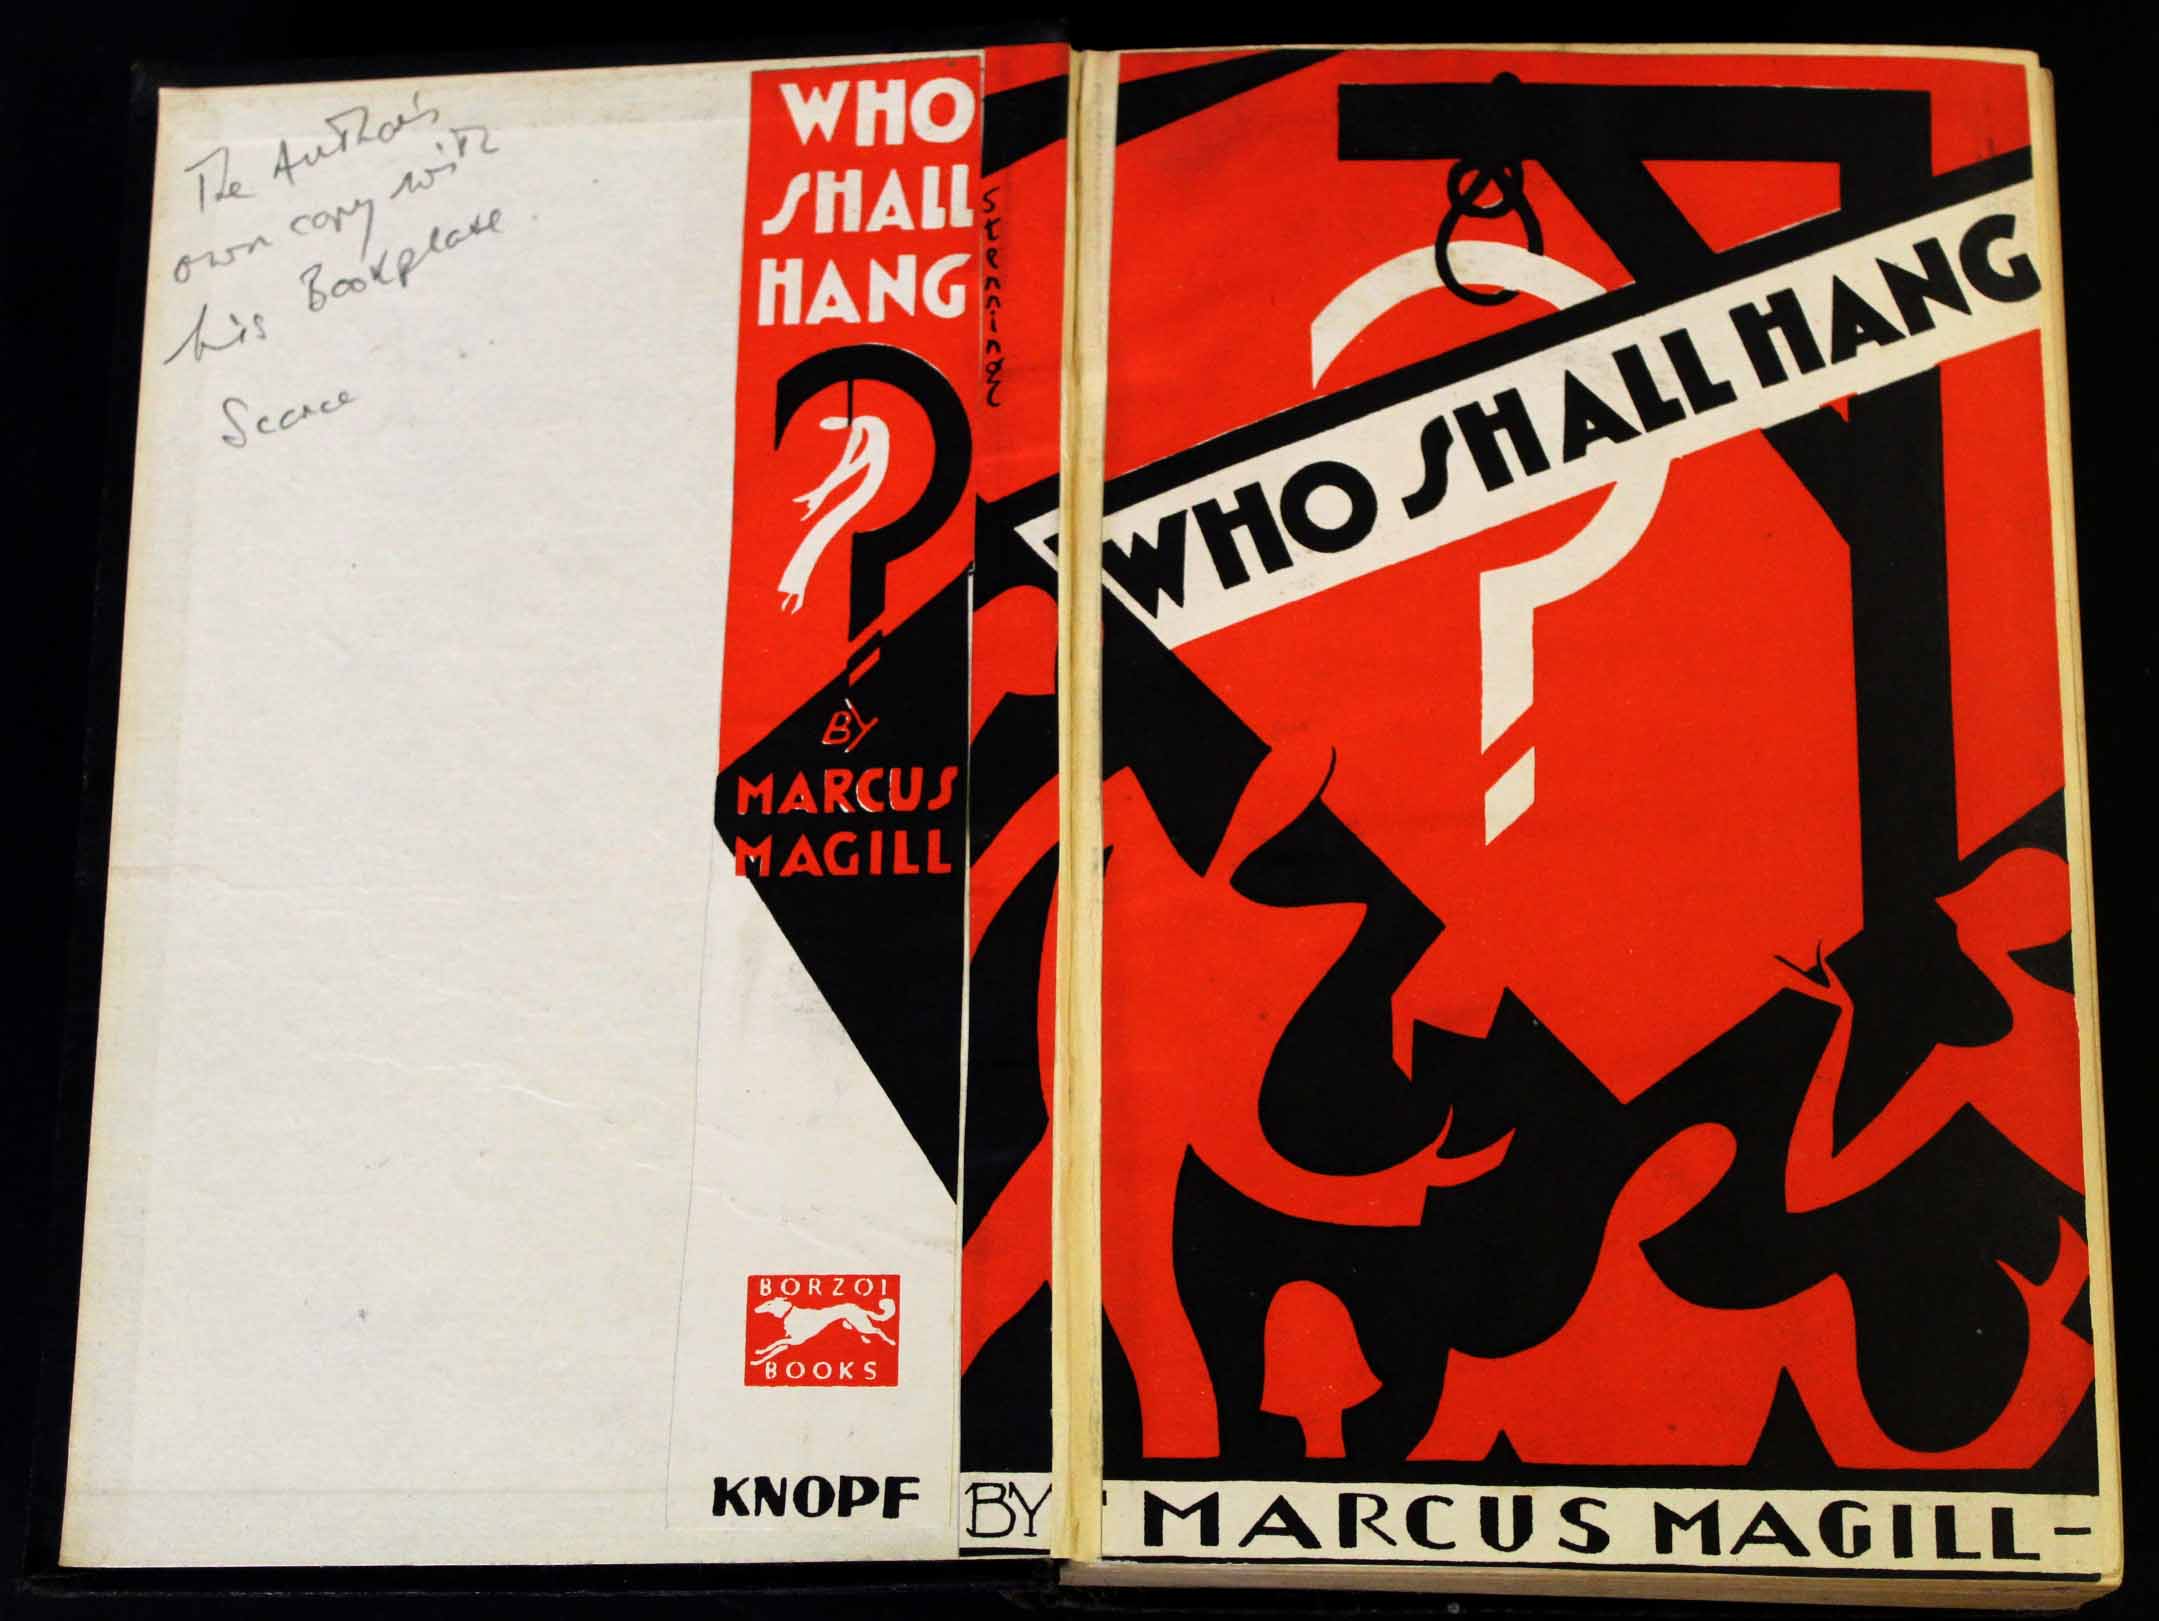 MARCUS MAGILL: WHO SHALL HANG, London, Alfred A Knopf, 1929, 1st edition, author's book plate